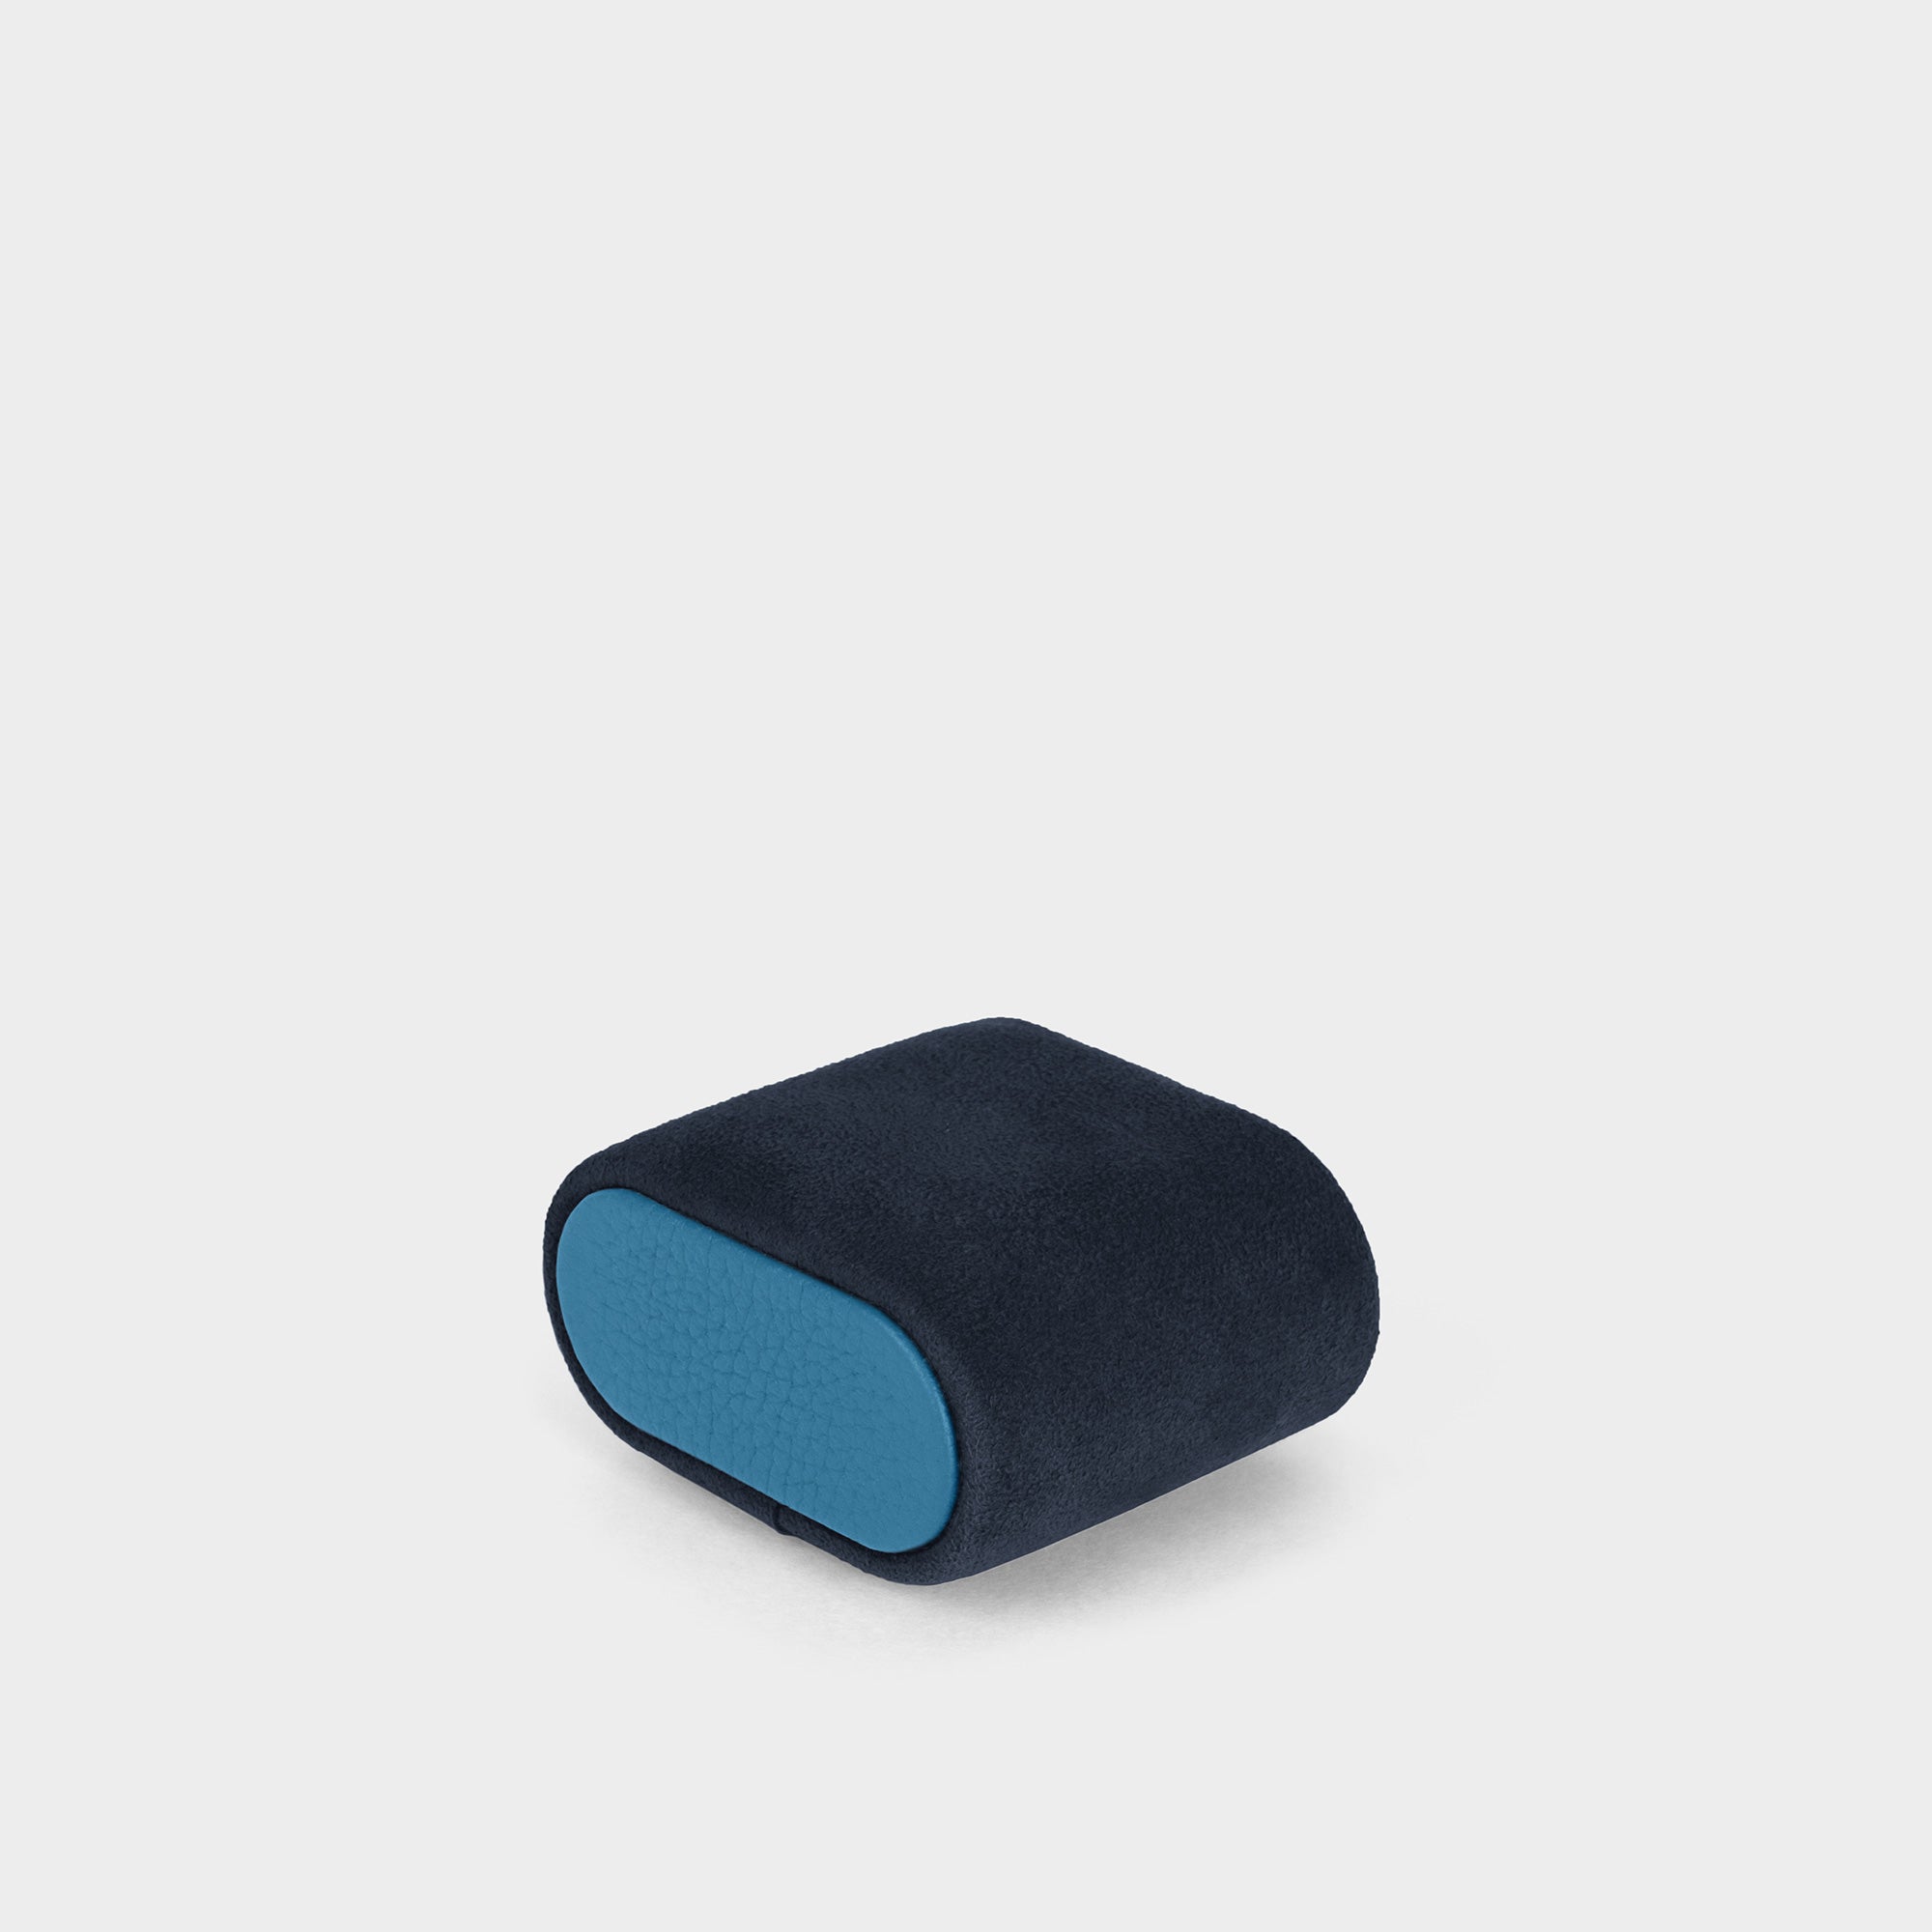 Soft Alcantara cushion with contrasting sky blue leather accents